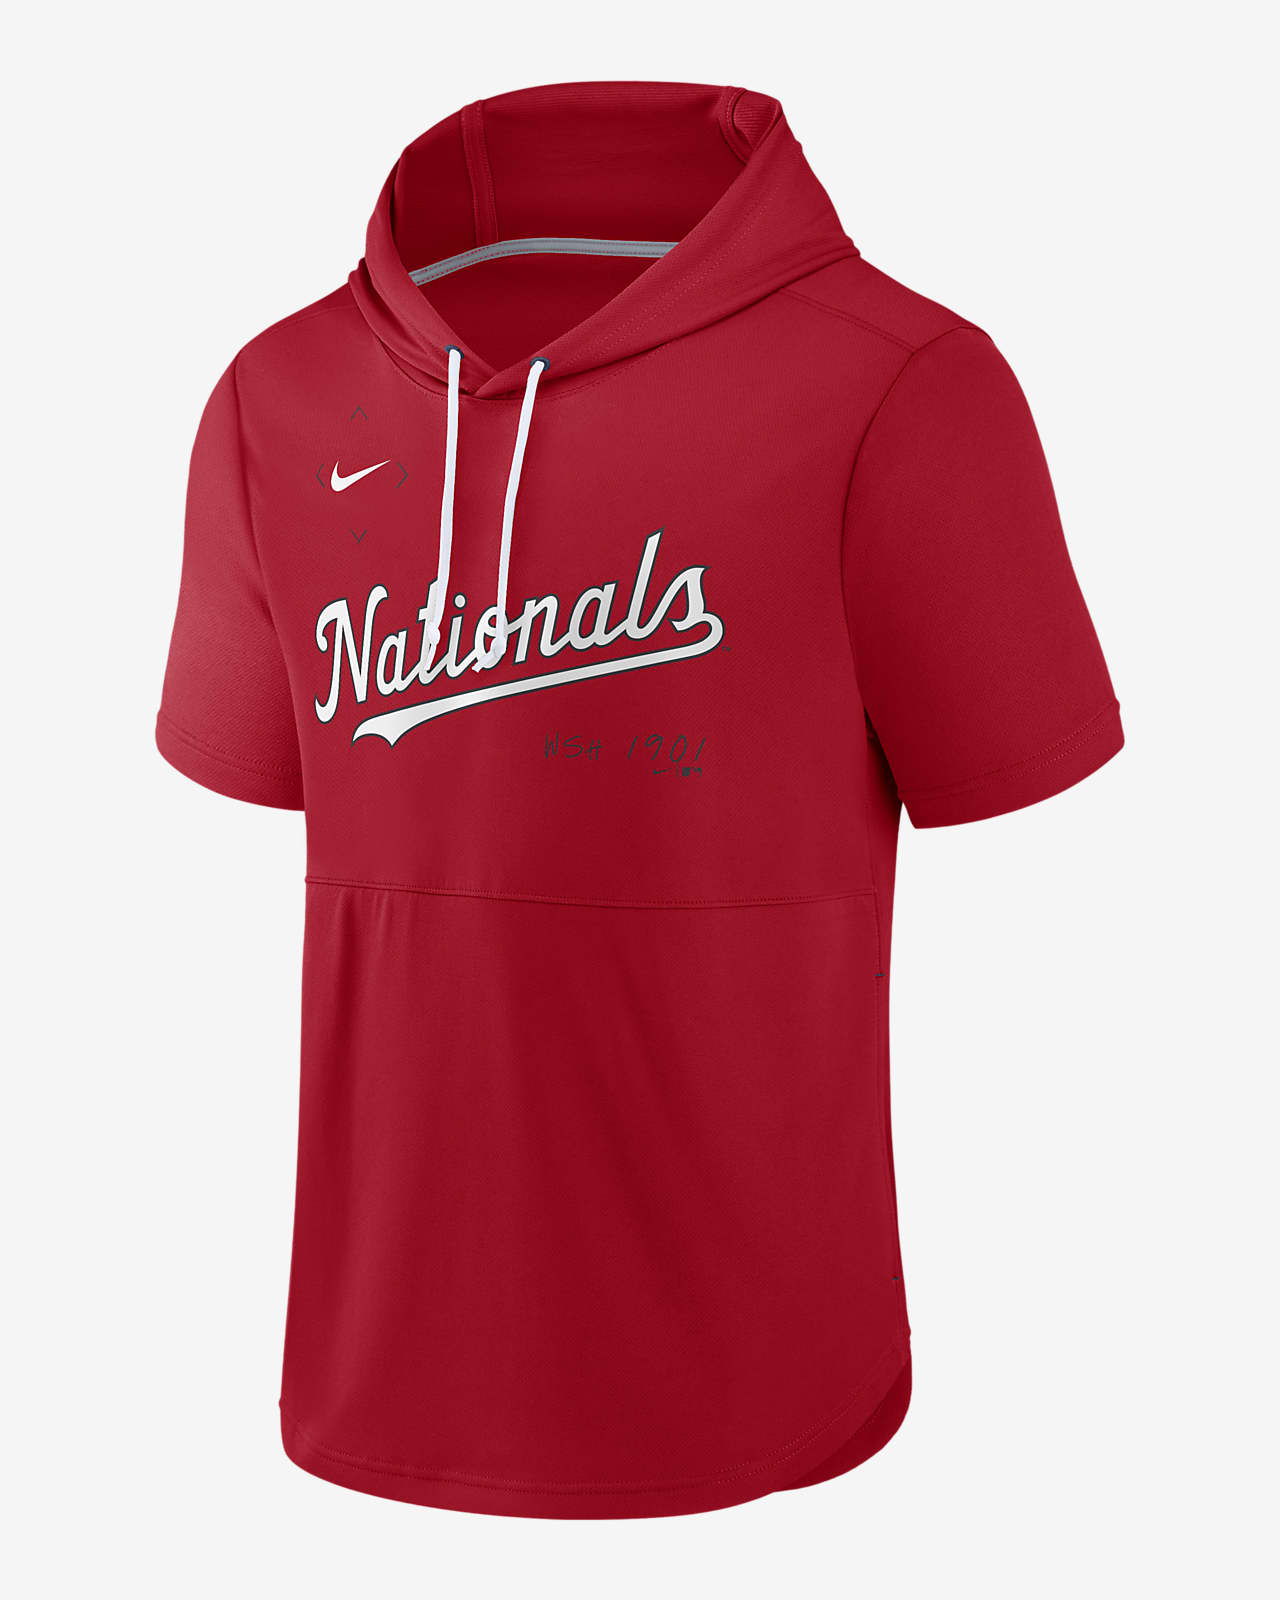 https://static.nike.com/a/images/t_PDP_1280_v1/f_auto,q_auto:eco/bb688eaf-c20b-4993-ba7d-64ef49e6c27b/springer-washington-nationals-mens-short-sleeve-pullover-hoodie-5LwvWL.png